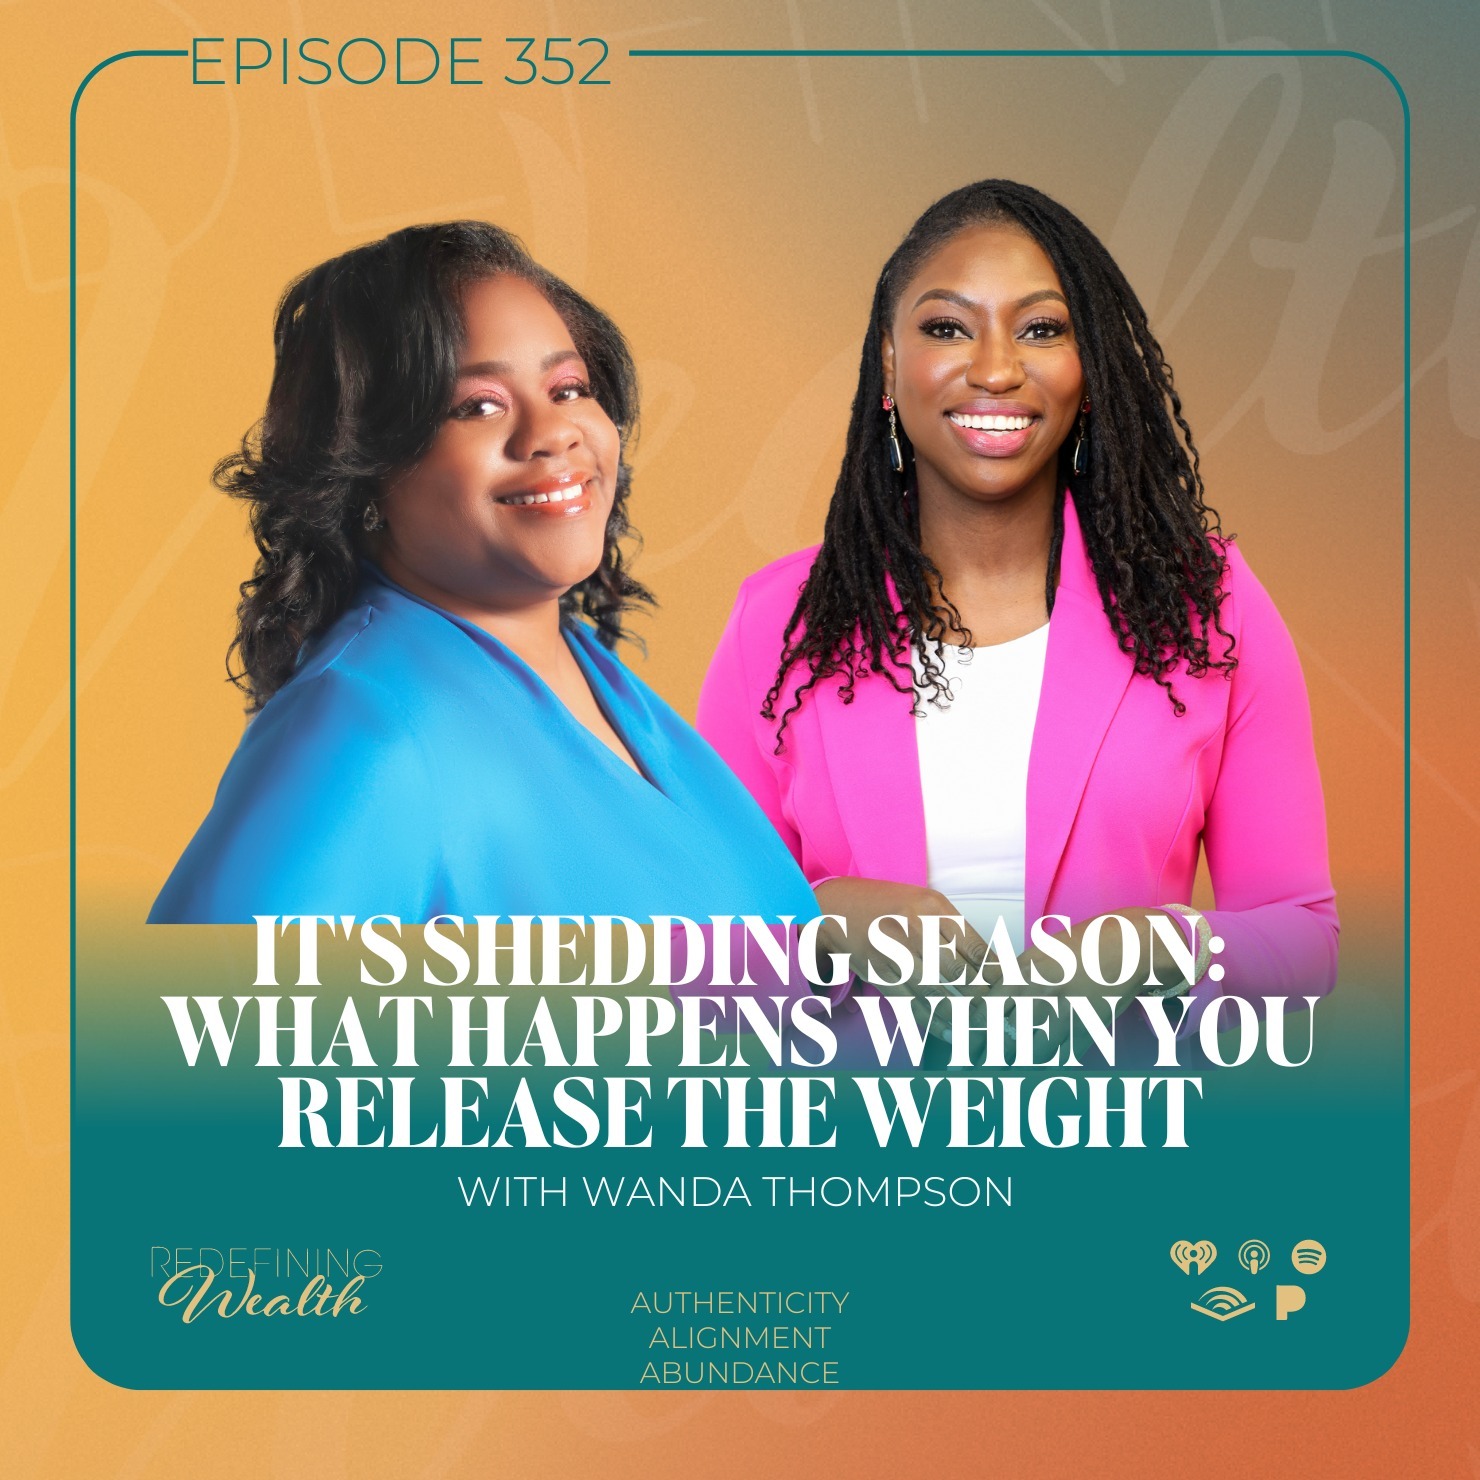 It’s Shedding Season: What Happens When You Release the Weight with Wanda Thompson